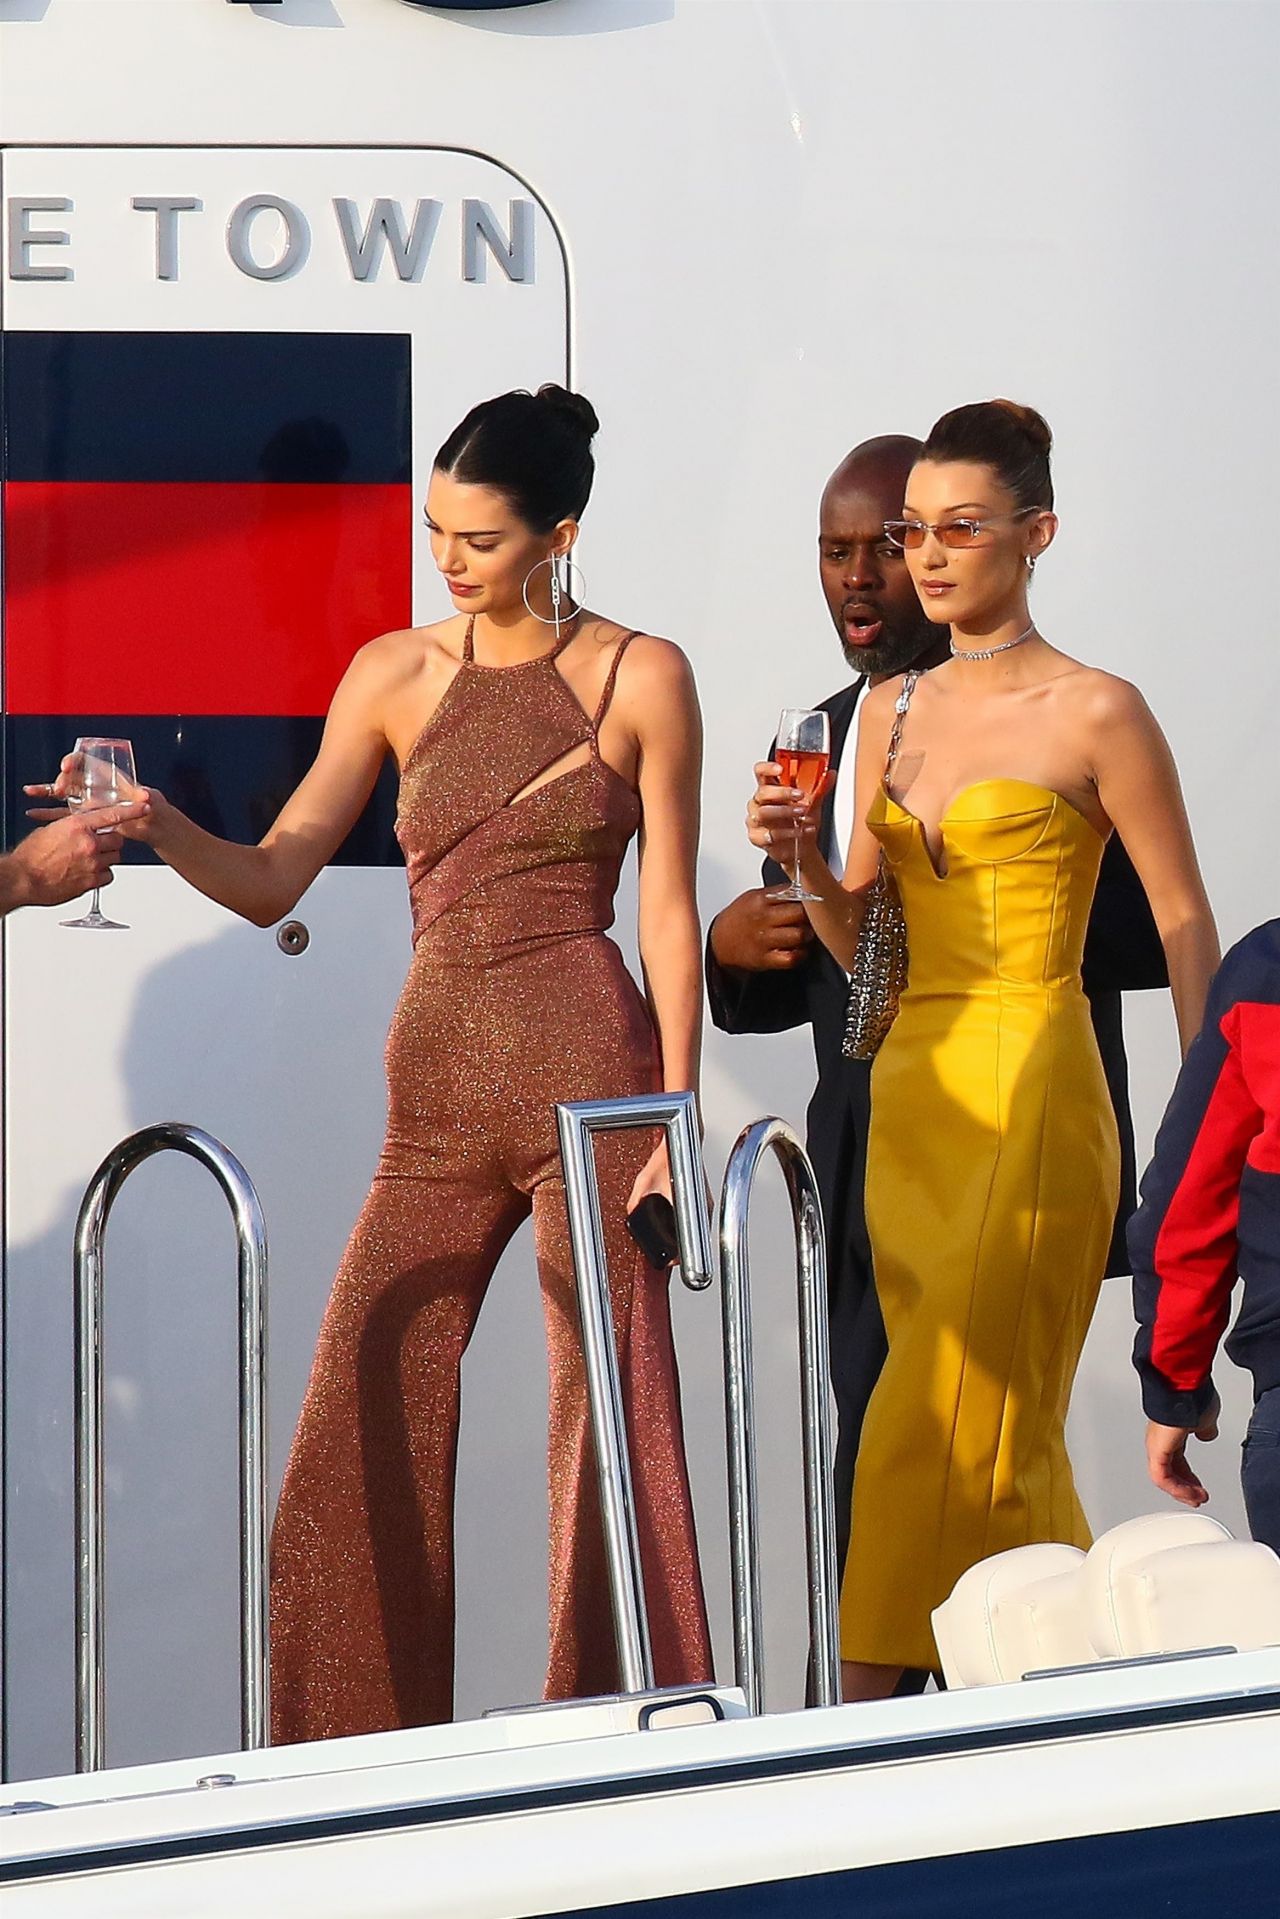 bella-hadid-and-kendall-jenner-tommy-hilfigers-yacht-in-monaco-05-25-2019-23.jpg